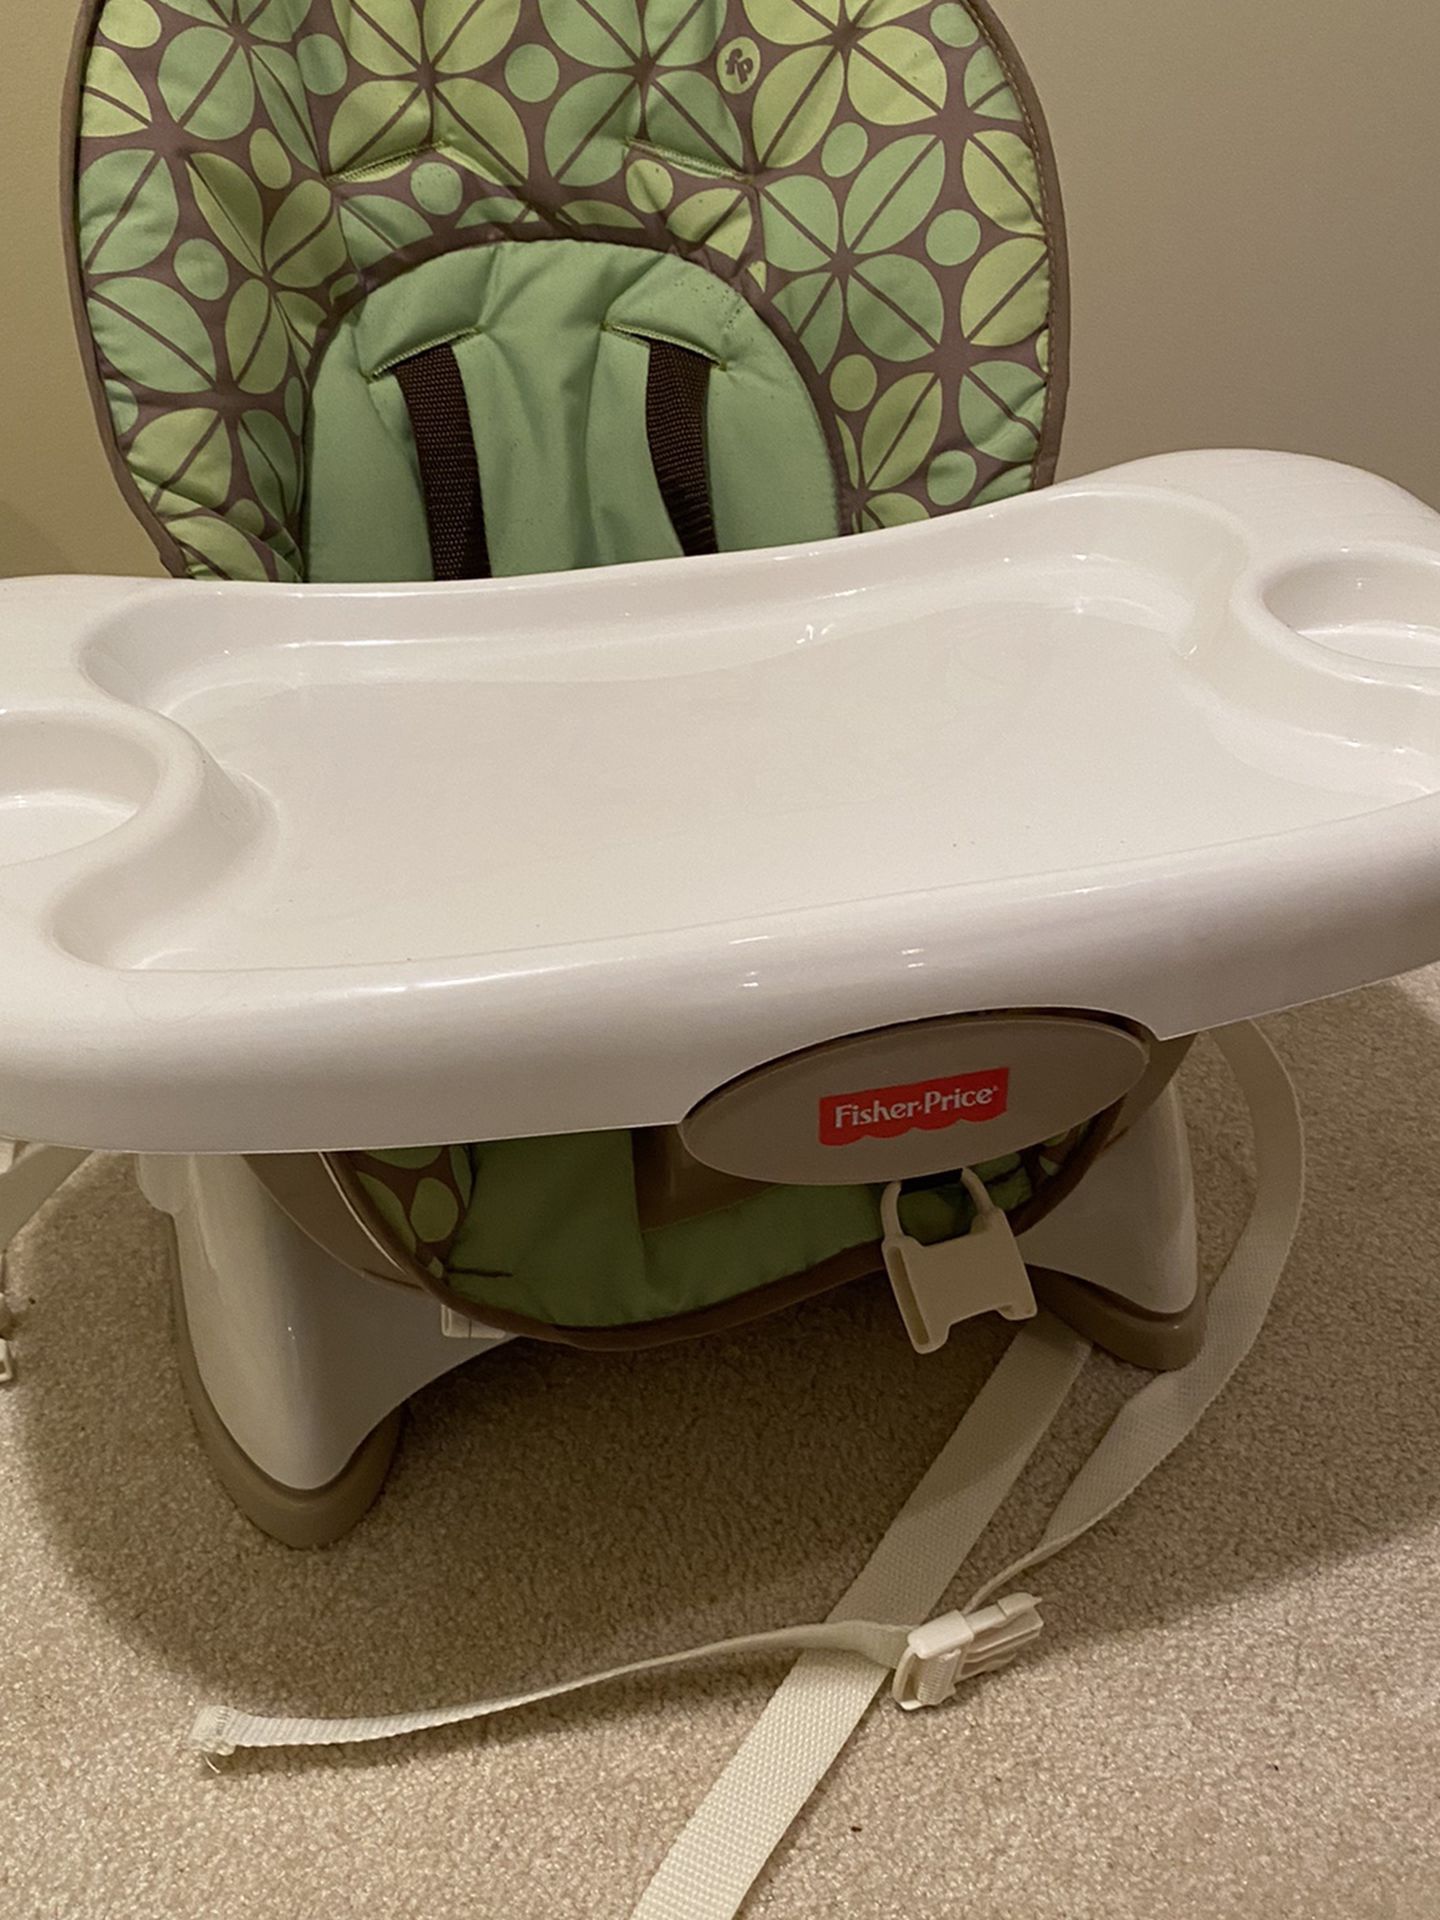 Fisher-Price Portable High Chair